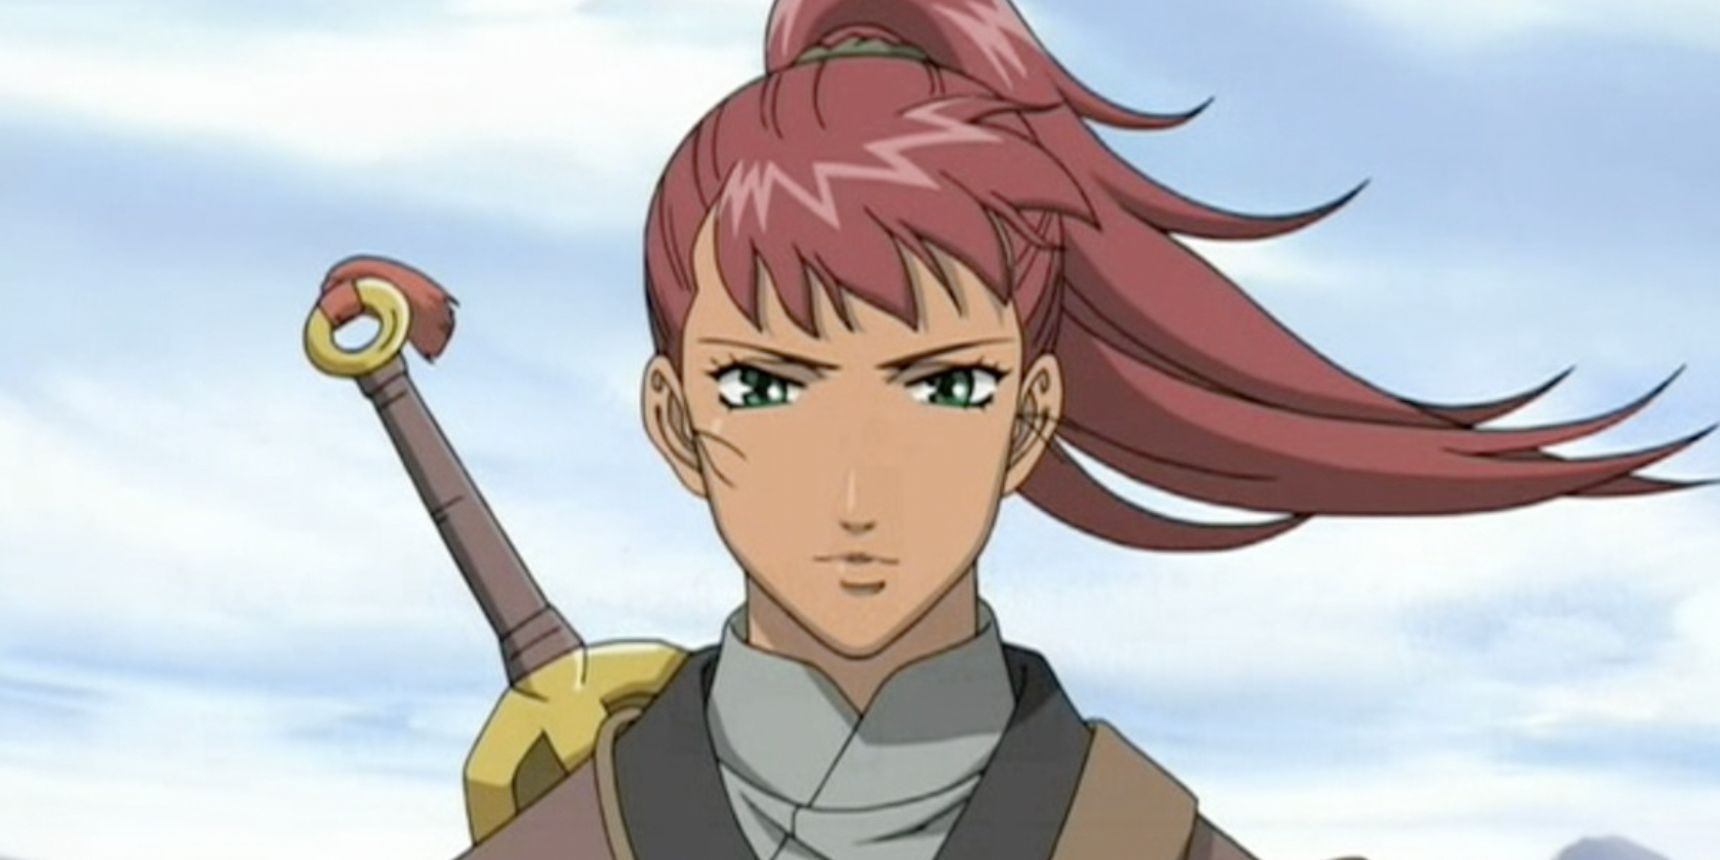 A close up of Youko Nakajima with her sword strapped to her back in The Twelve Kingdoms